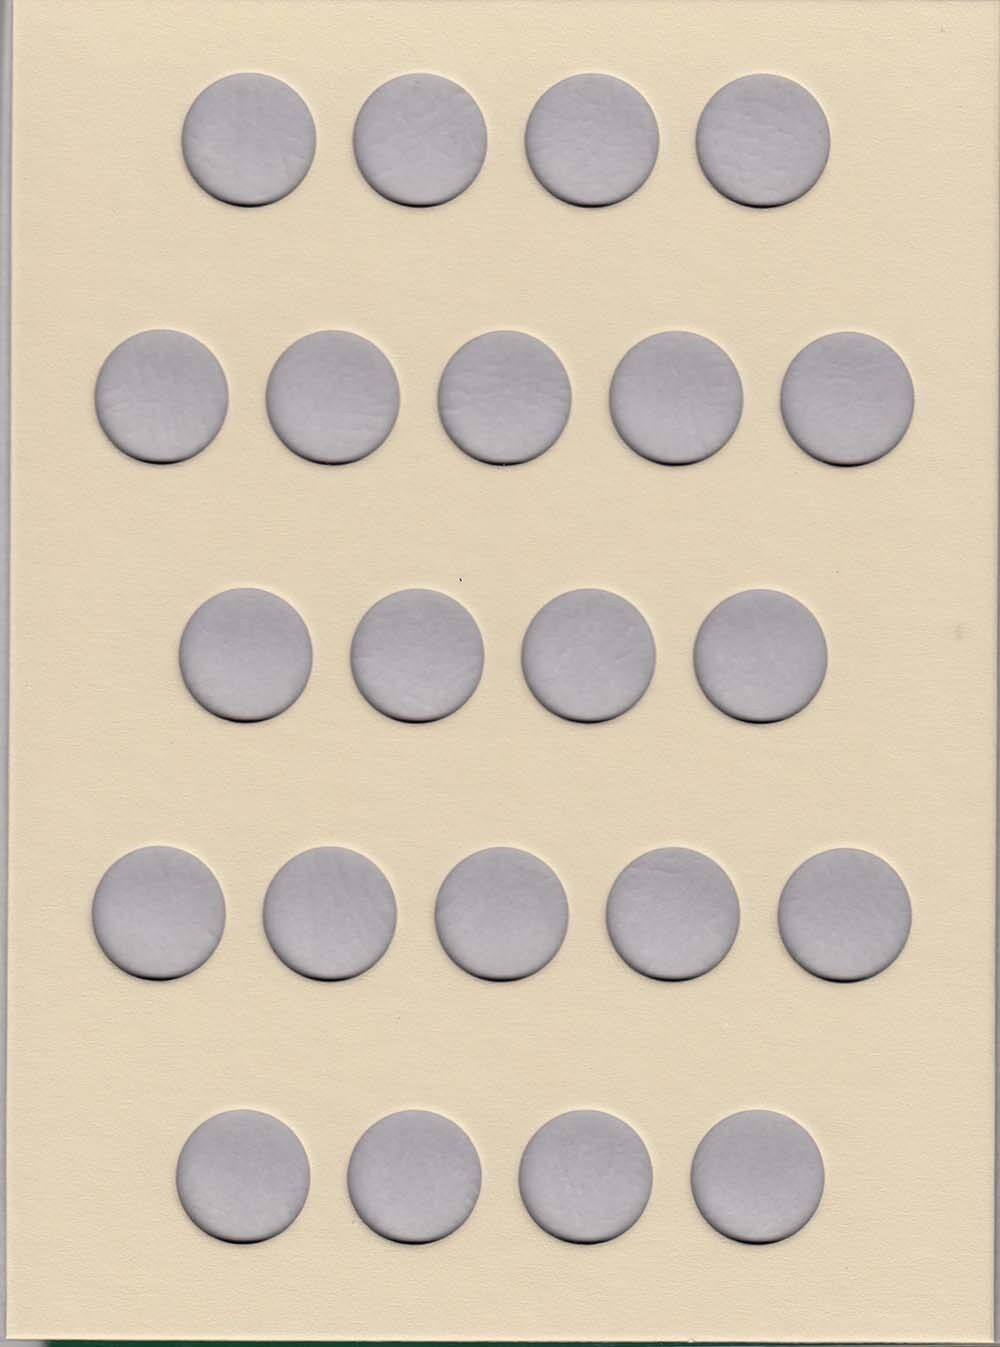 Littleton Coin Folder LCFQ For Collection Of US Quarters Blank New Free Shipping